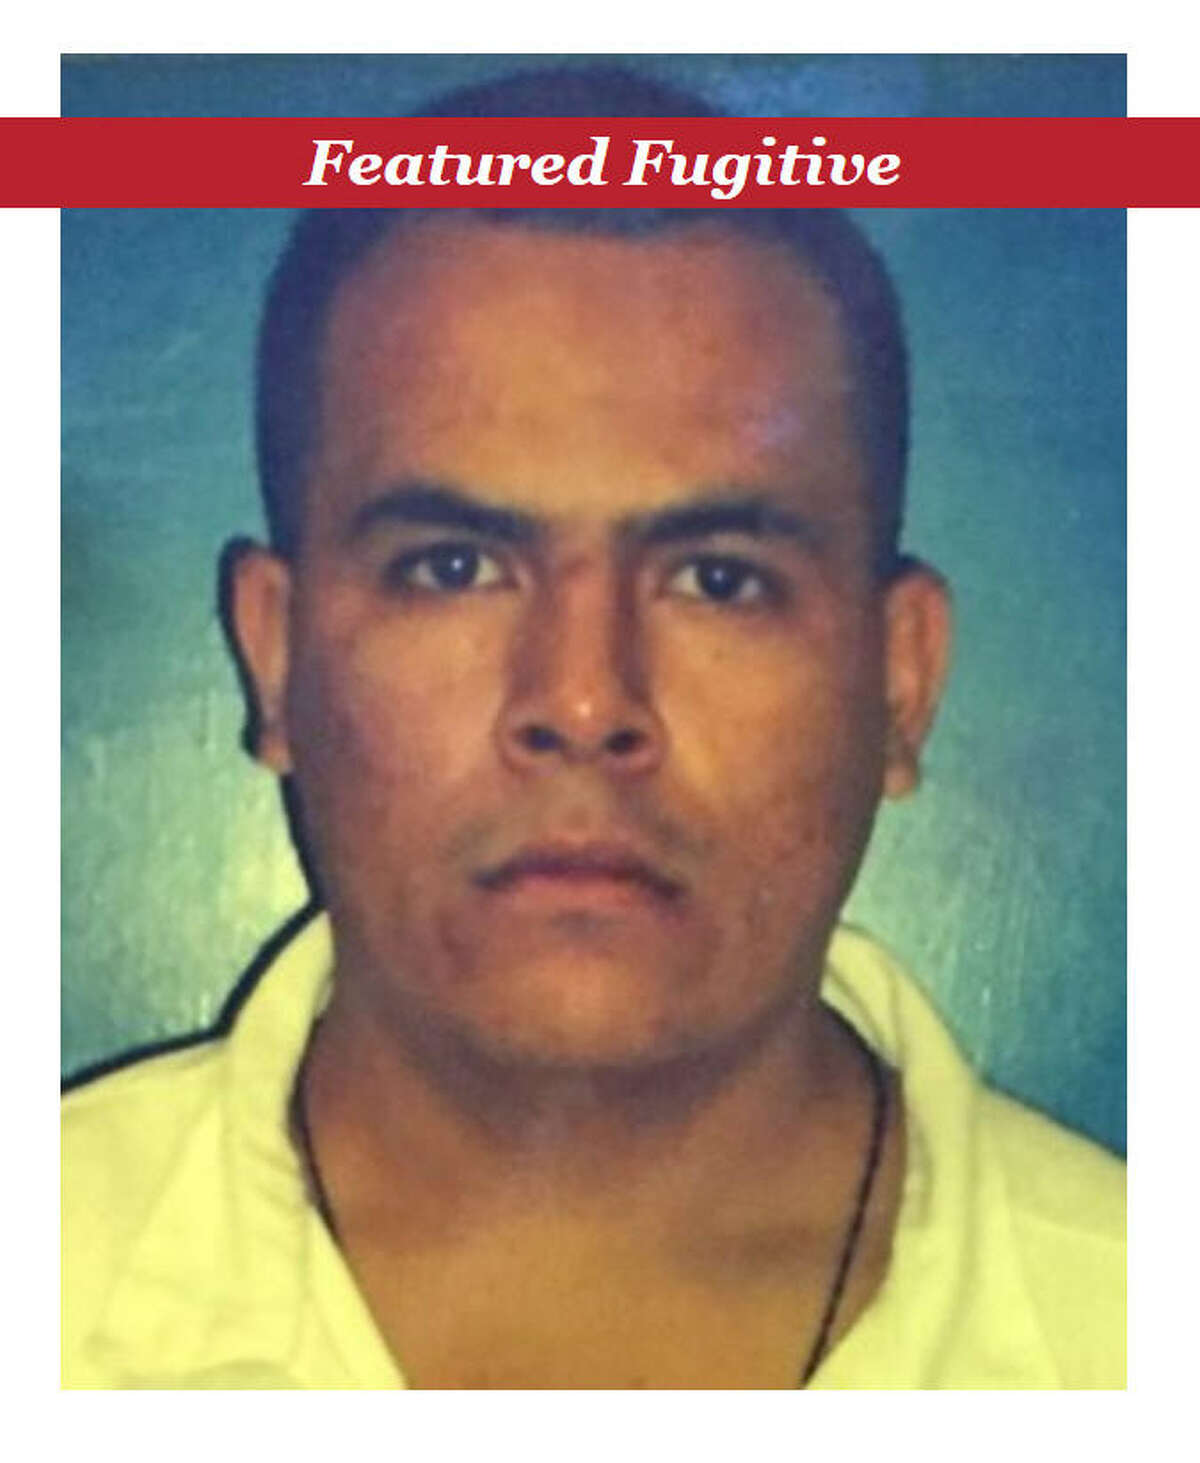 Jose Fernanado Bustos-Diaz is among Texas' 10 Most Wanted Fugitives. Click the gallery to see the rest of Texas' Most Wanted Fugitives.